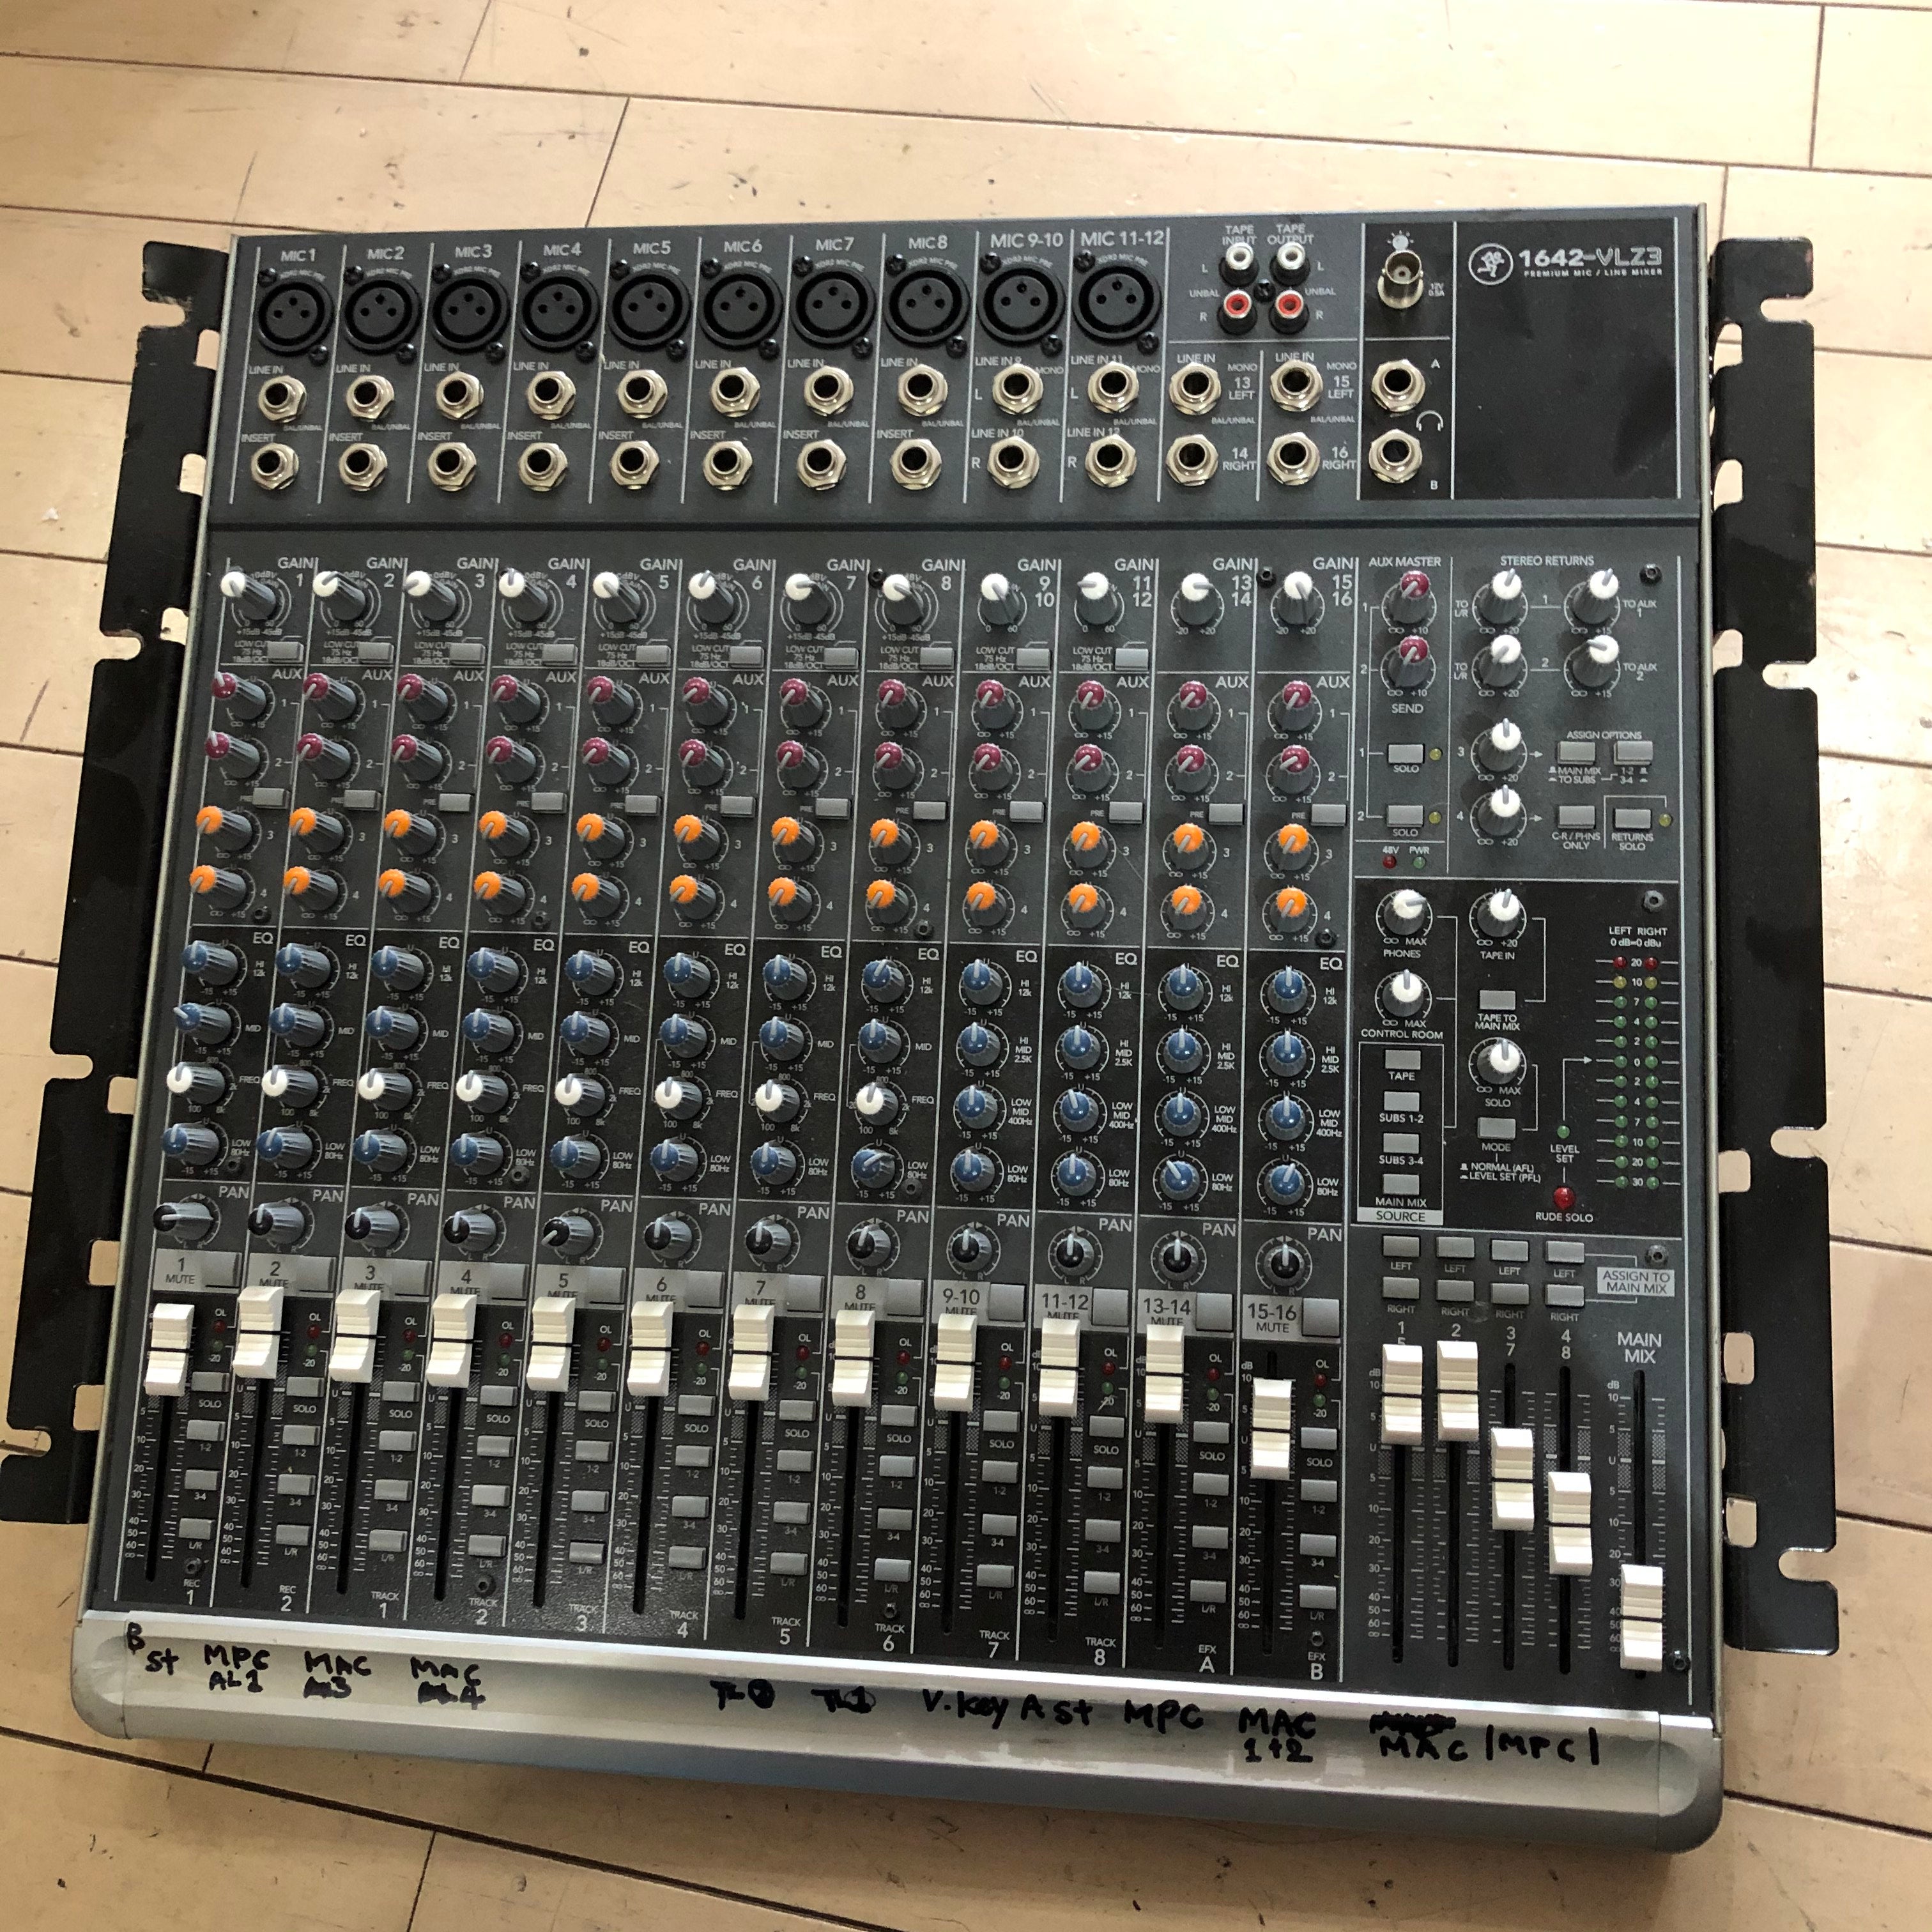 MACKIE 16-CHANNEL ANALOGUE MIXER [1642 Vlz3]